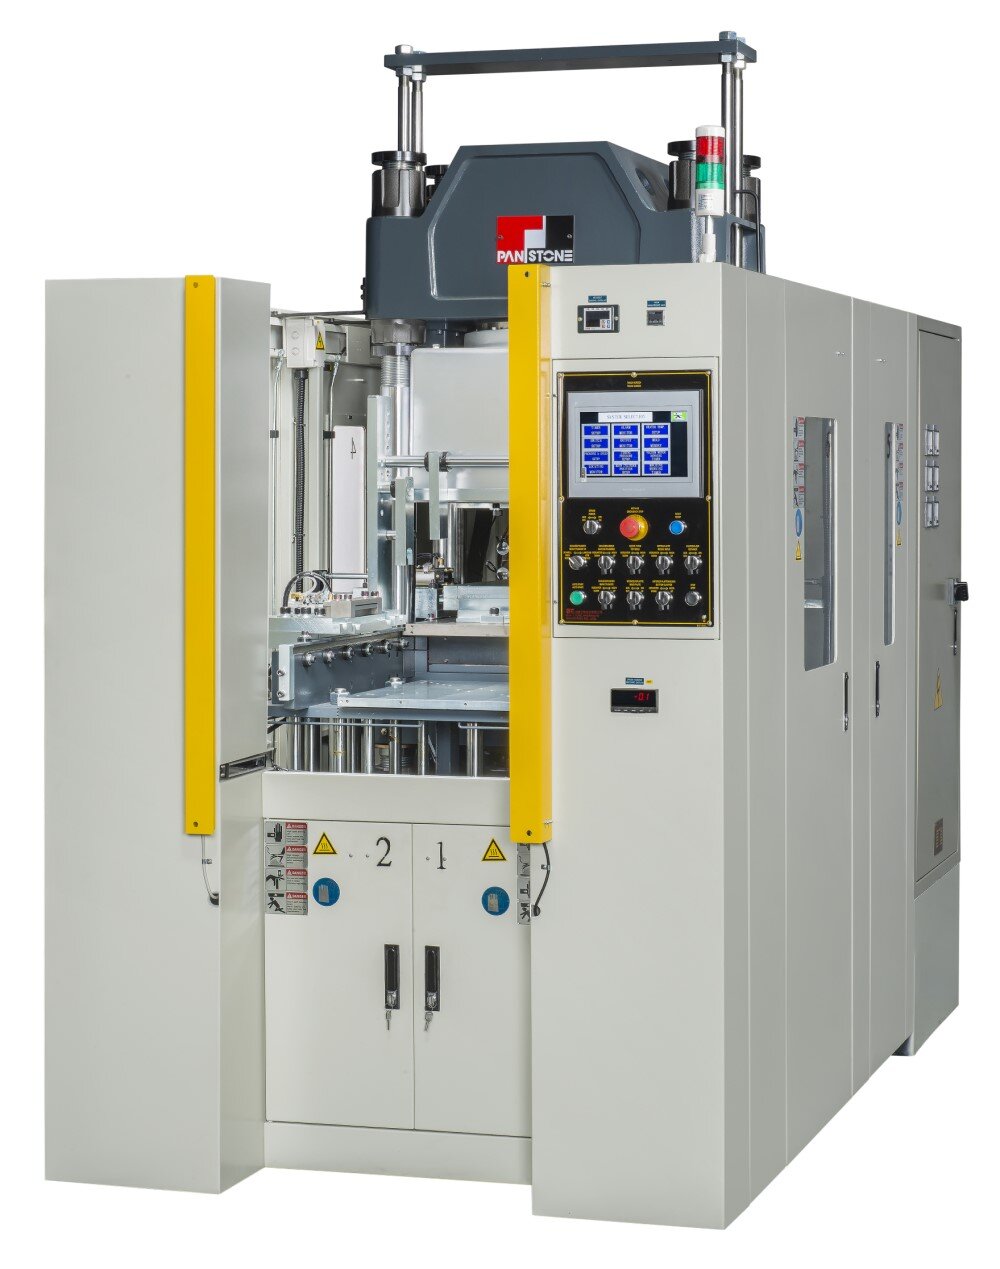 Compression Presses  - From 35 tons to over 10,000 tonsNew PLC Control with easy user interfaceMany custom features availablePatented mold handling system